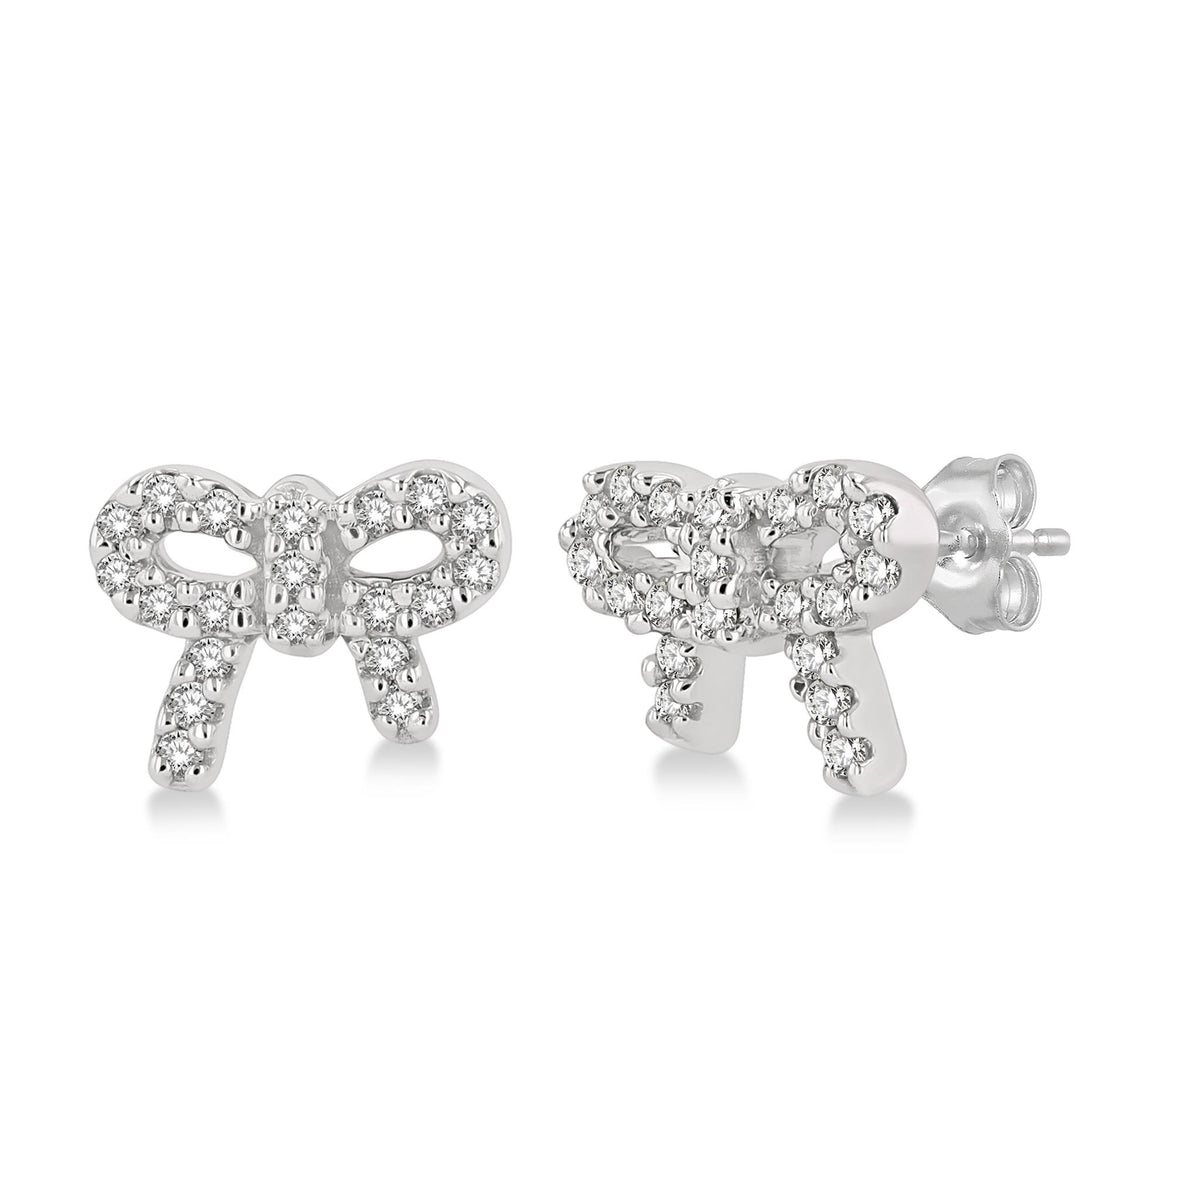 Lasker Petites-10Kt White Gold Bow Tie Stud Earrings with 0.11cttw Natural Diamonds